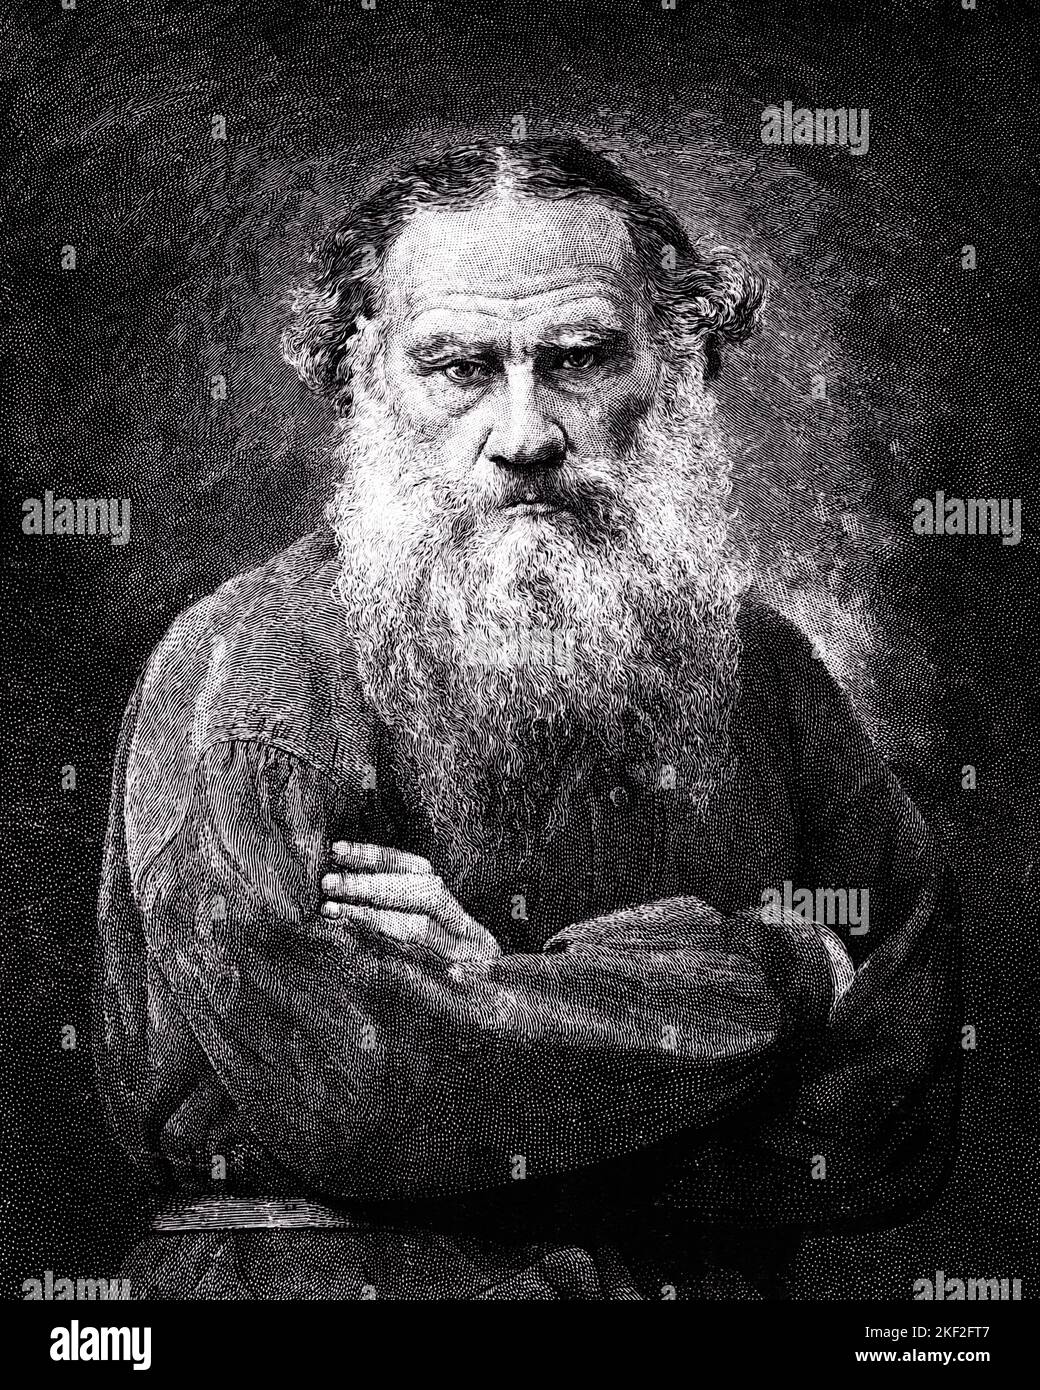 1880s 1887 PORTRAIT RUSSIAN NOVELIST LEO TOLSTOY IN PEASANT CLOTHES LOOKING AT CAMERA WITH SIGNATURE THE AUTHOR OF WAR AND PEACE - q60009 CPC001 HARS OLD FASHIONED Stock Photo